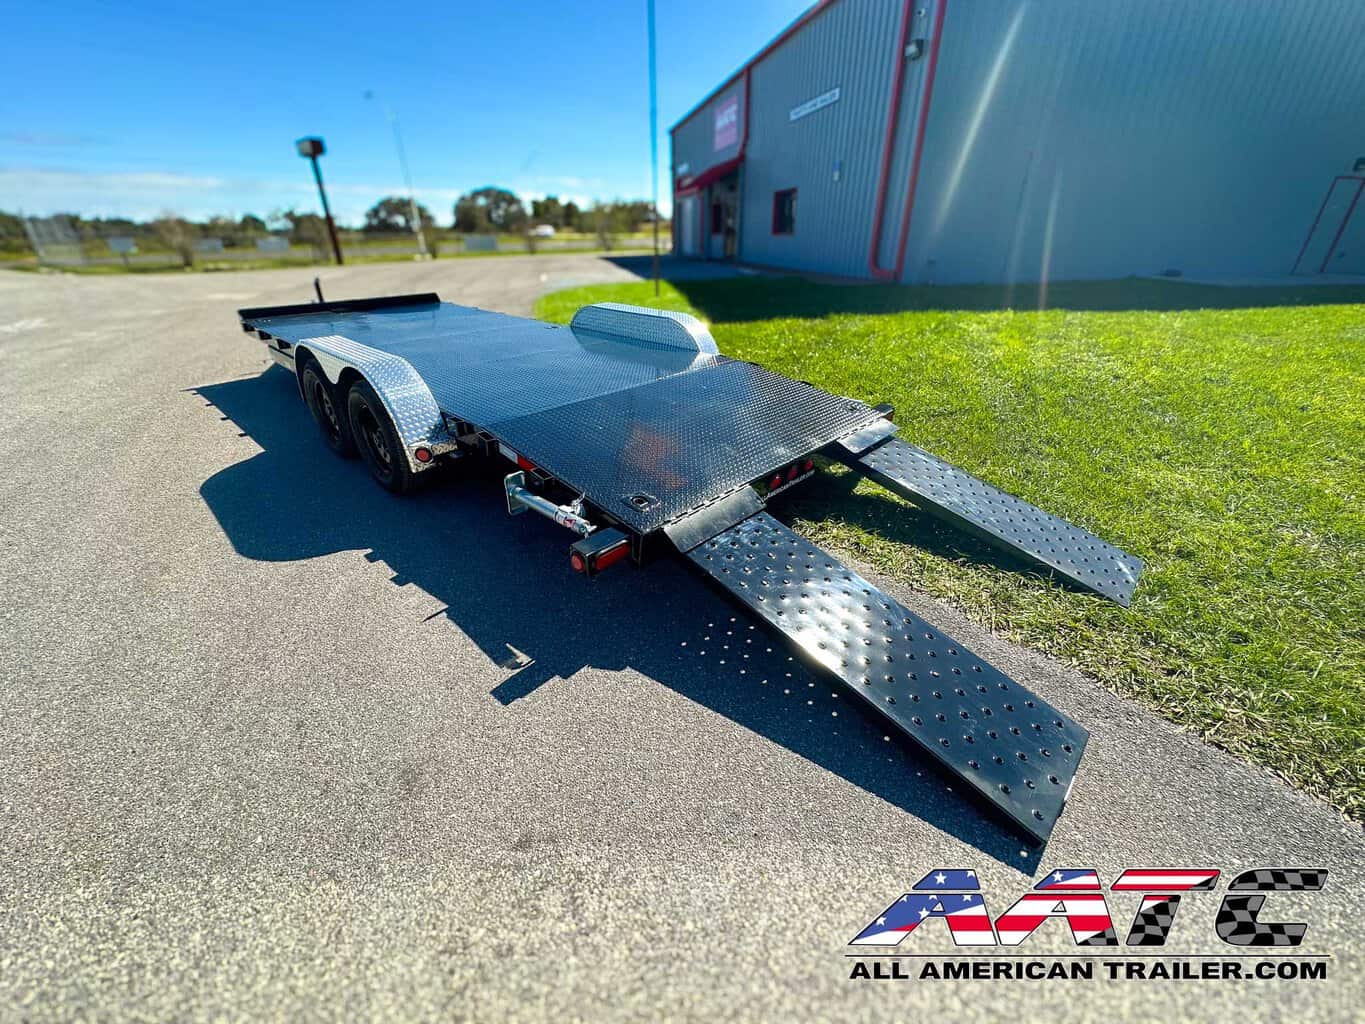 A PJ 20-foot steel deck car hauler trailer, model CH-202-SIR, designed for efficient vehicle transportation. This PJ Trailer features a 4-foot dovetail with 5-foot slide-in ramps, making it easy to load and unload vehicles. With a 3.5-ton capacity, a 7,000 GVWR, electric brakes, and a black finish, it's a durable and practical choice for car hauling. The bumper pull design allows for convenient towing.